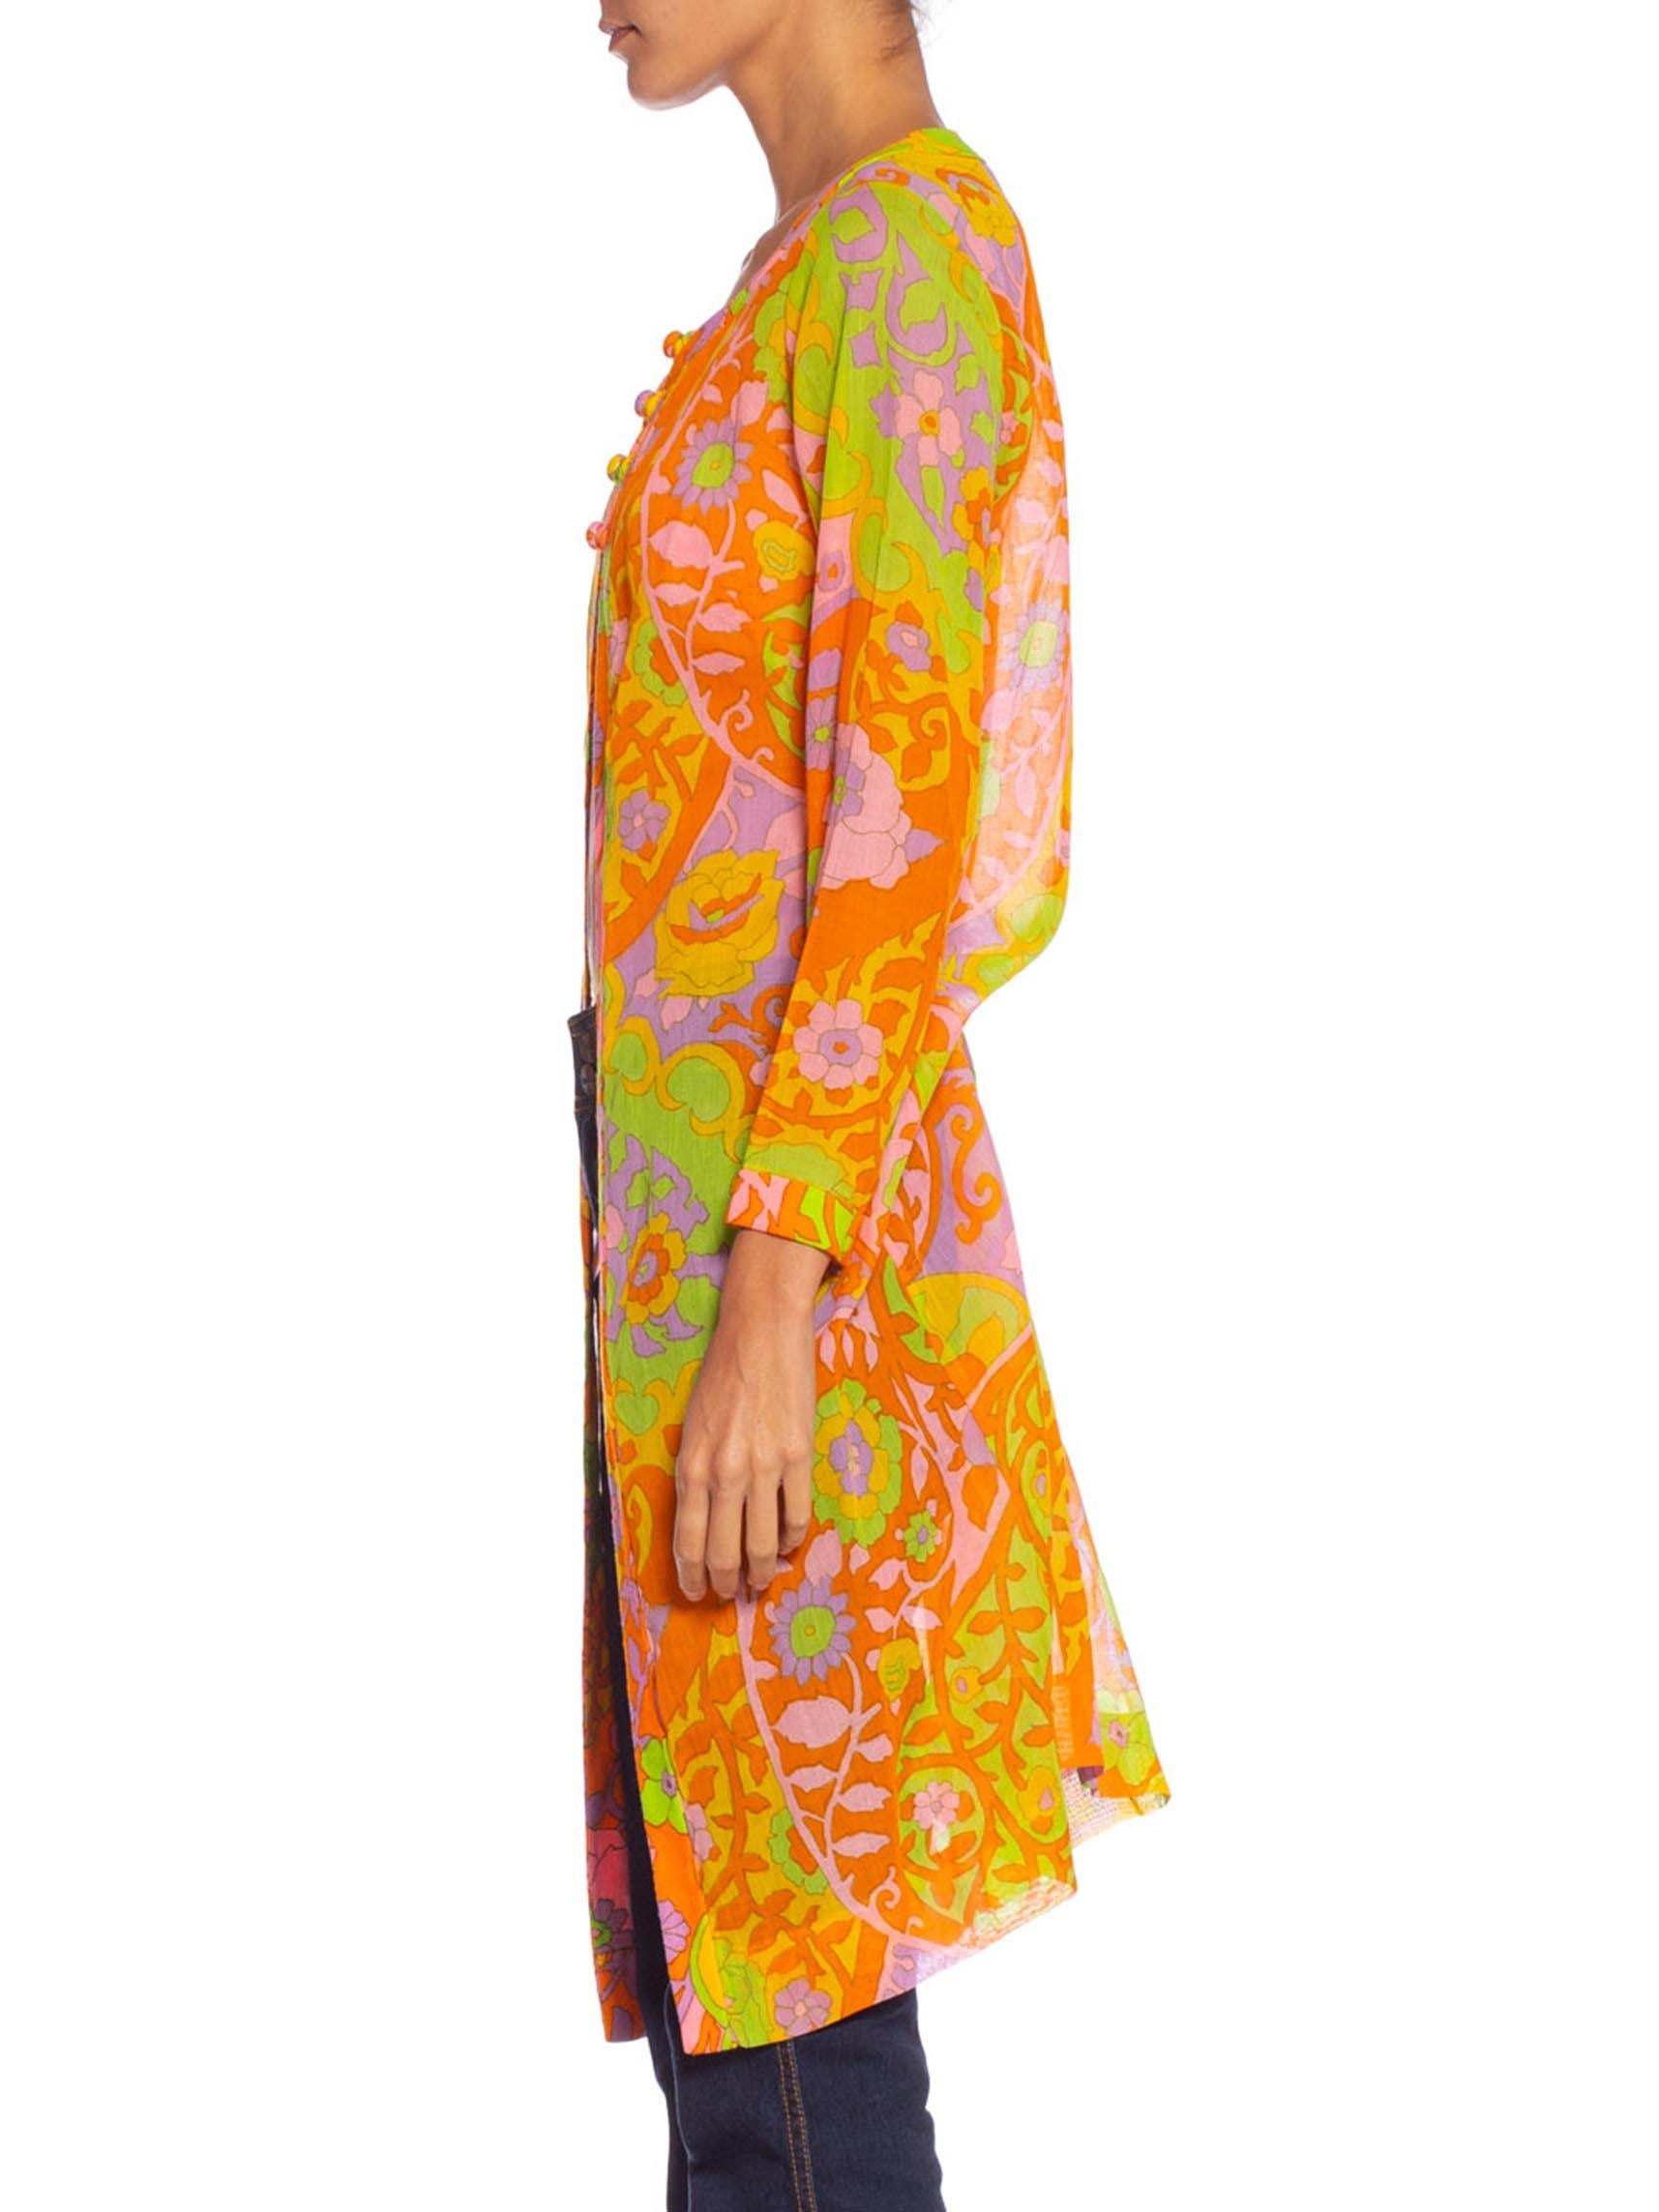 Women's 1960S Lime Green & Orange Cotton Voile Mod Psychedelic Floral Tunic Jacket Top